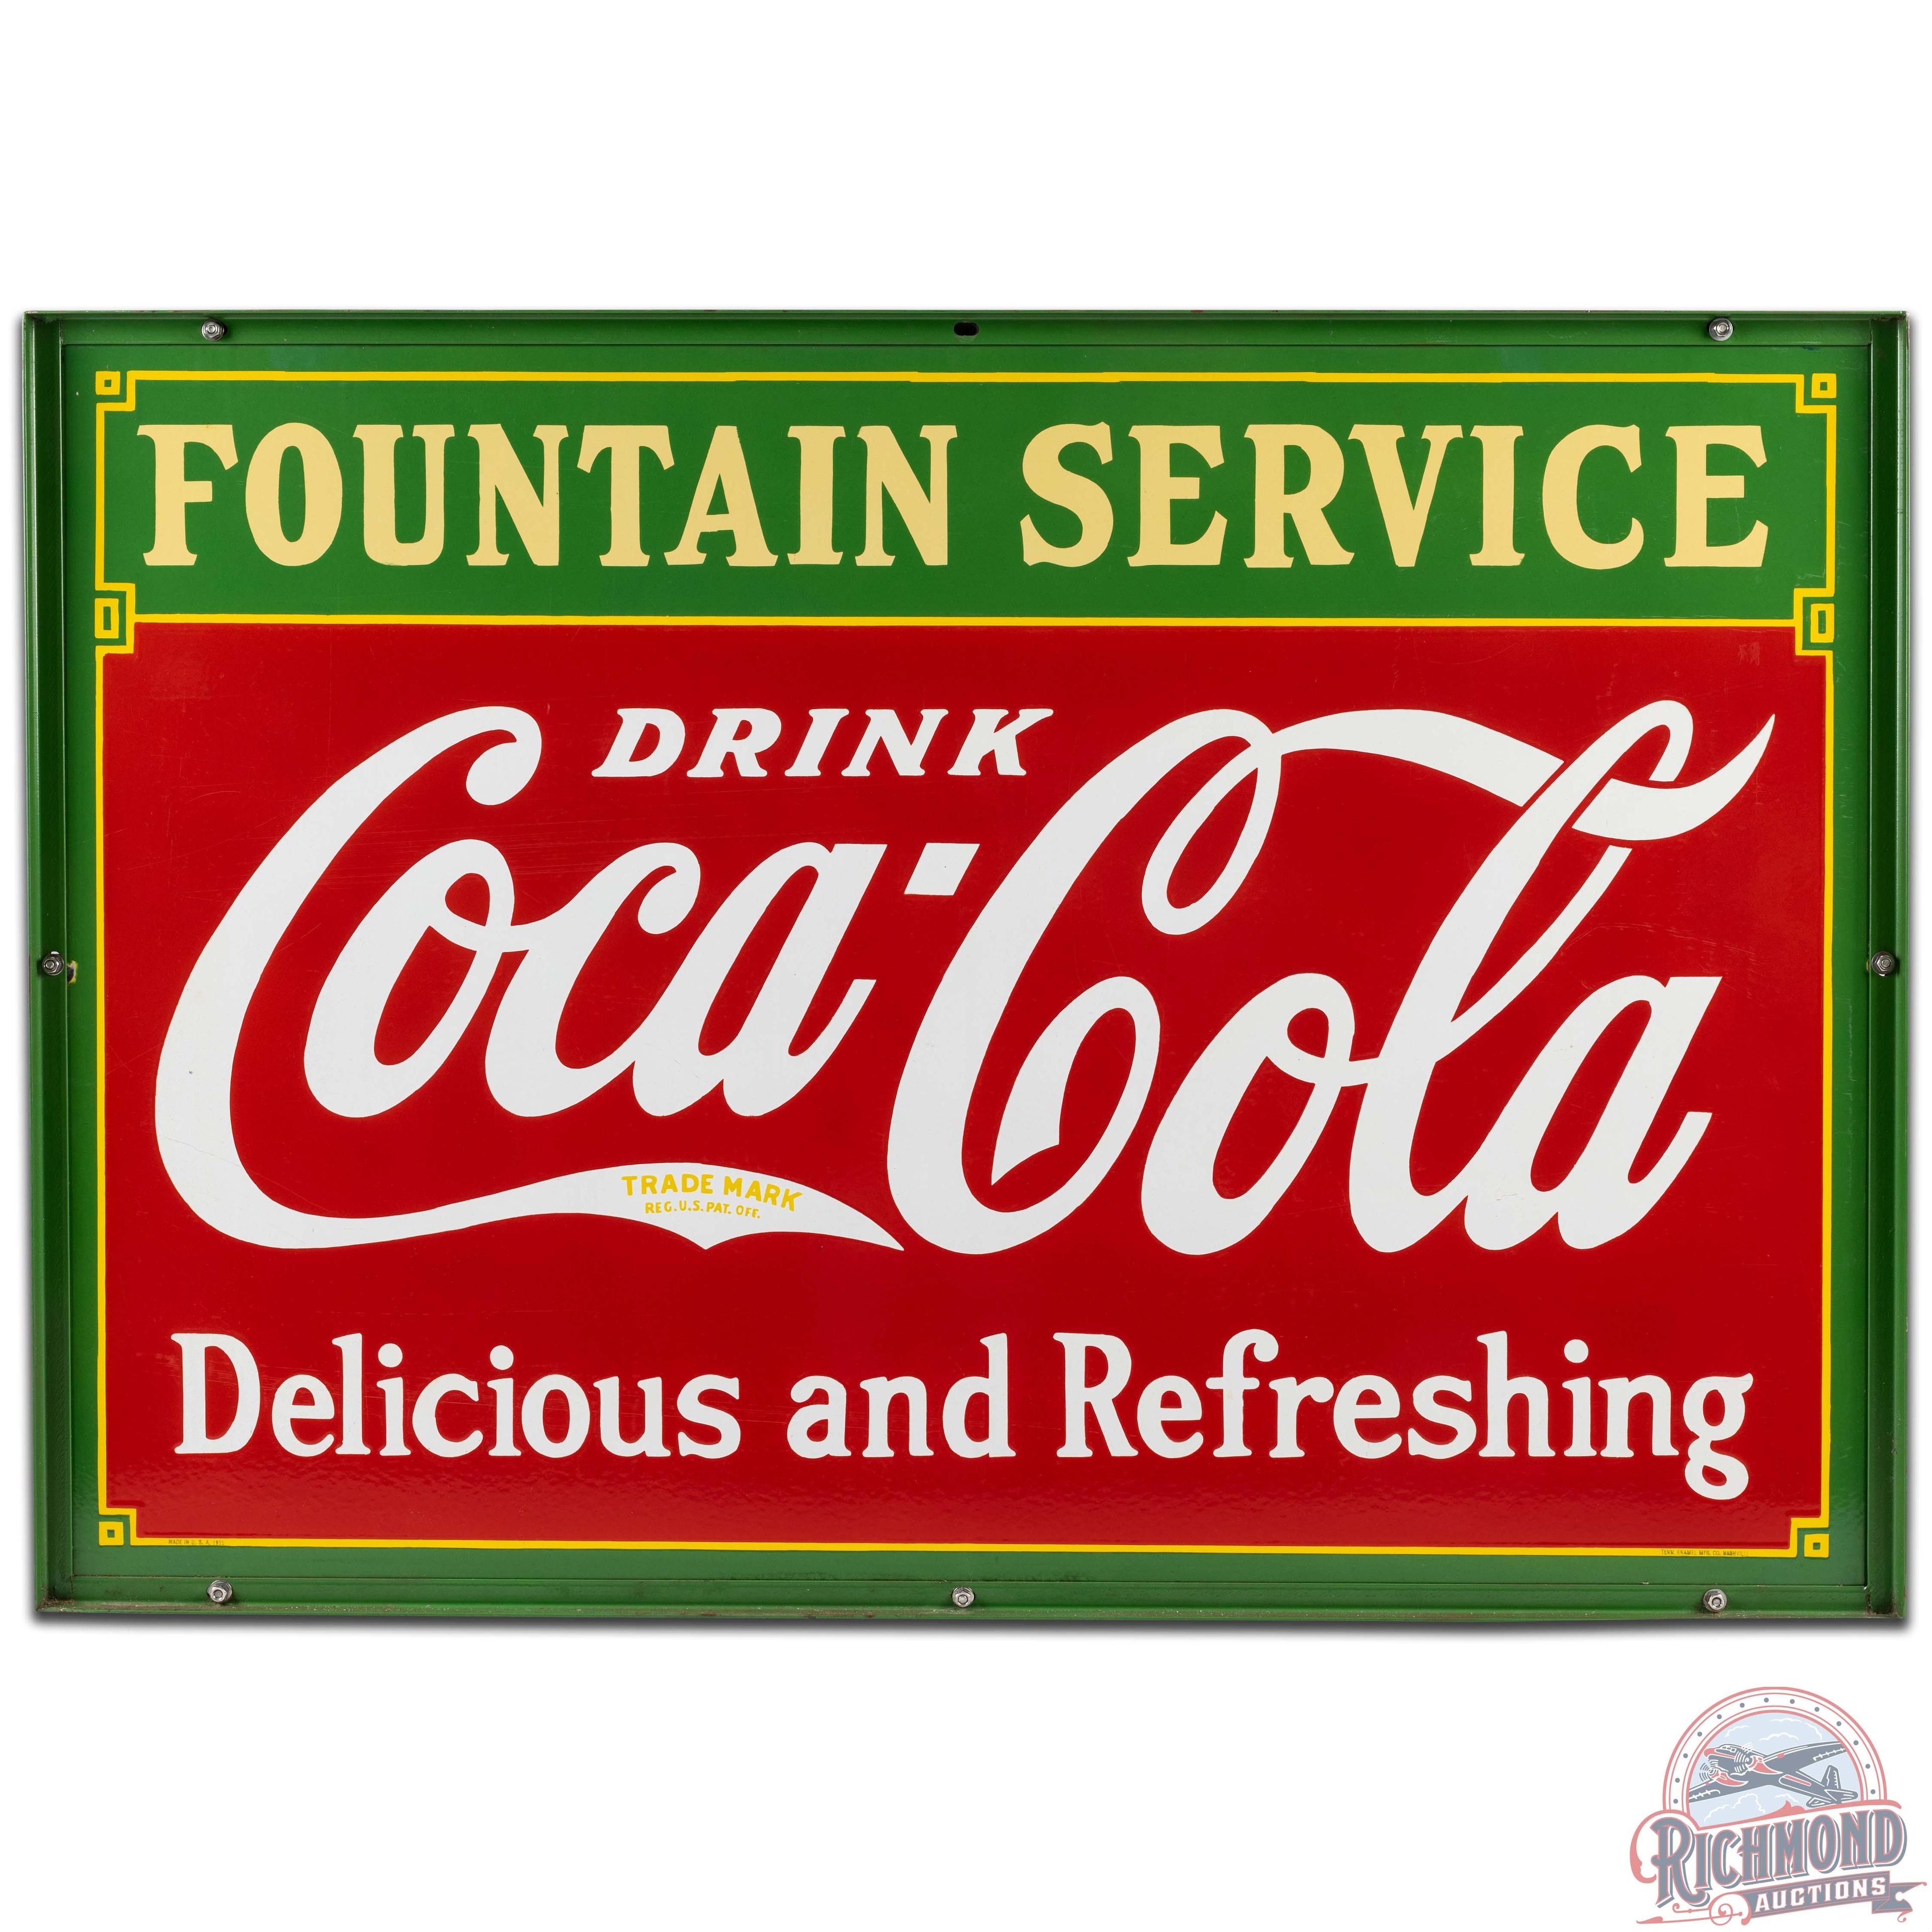 Drink Coca Cola Delicious and Refreshing Fountain Service DS Porcelain Sign w/ Frame